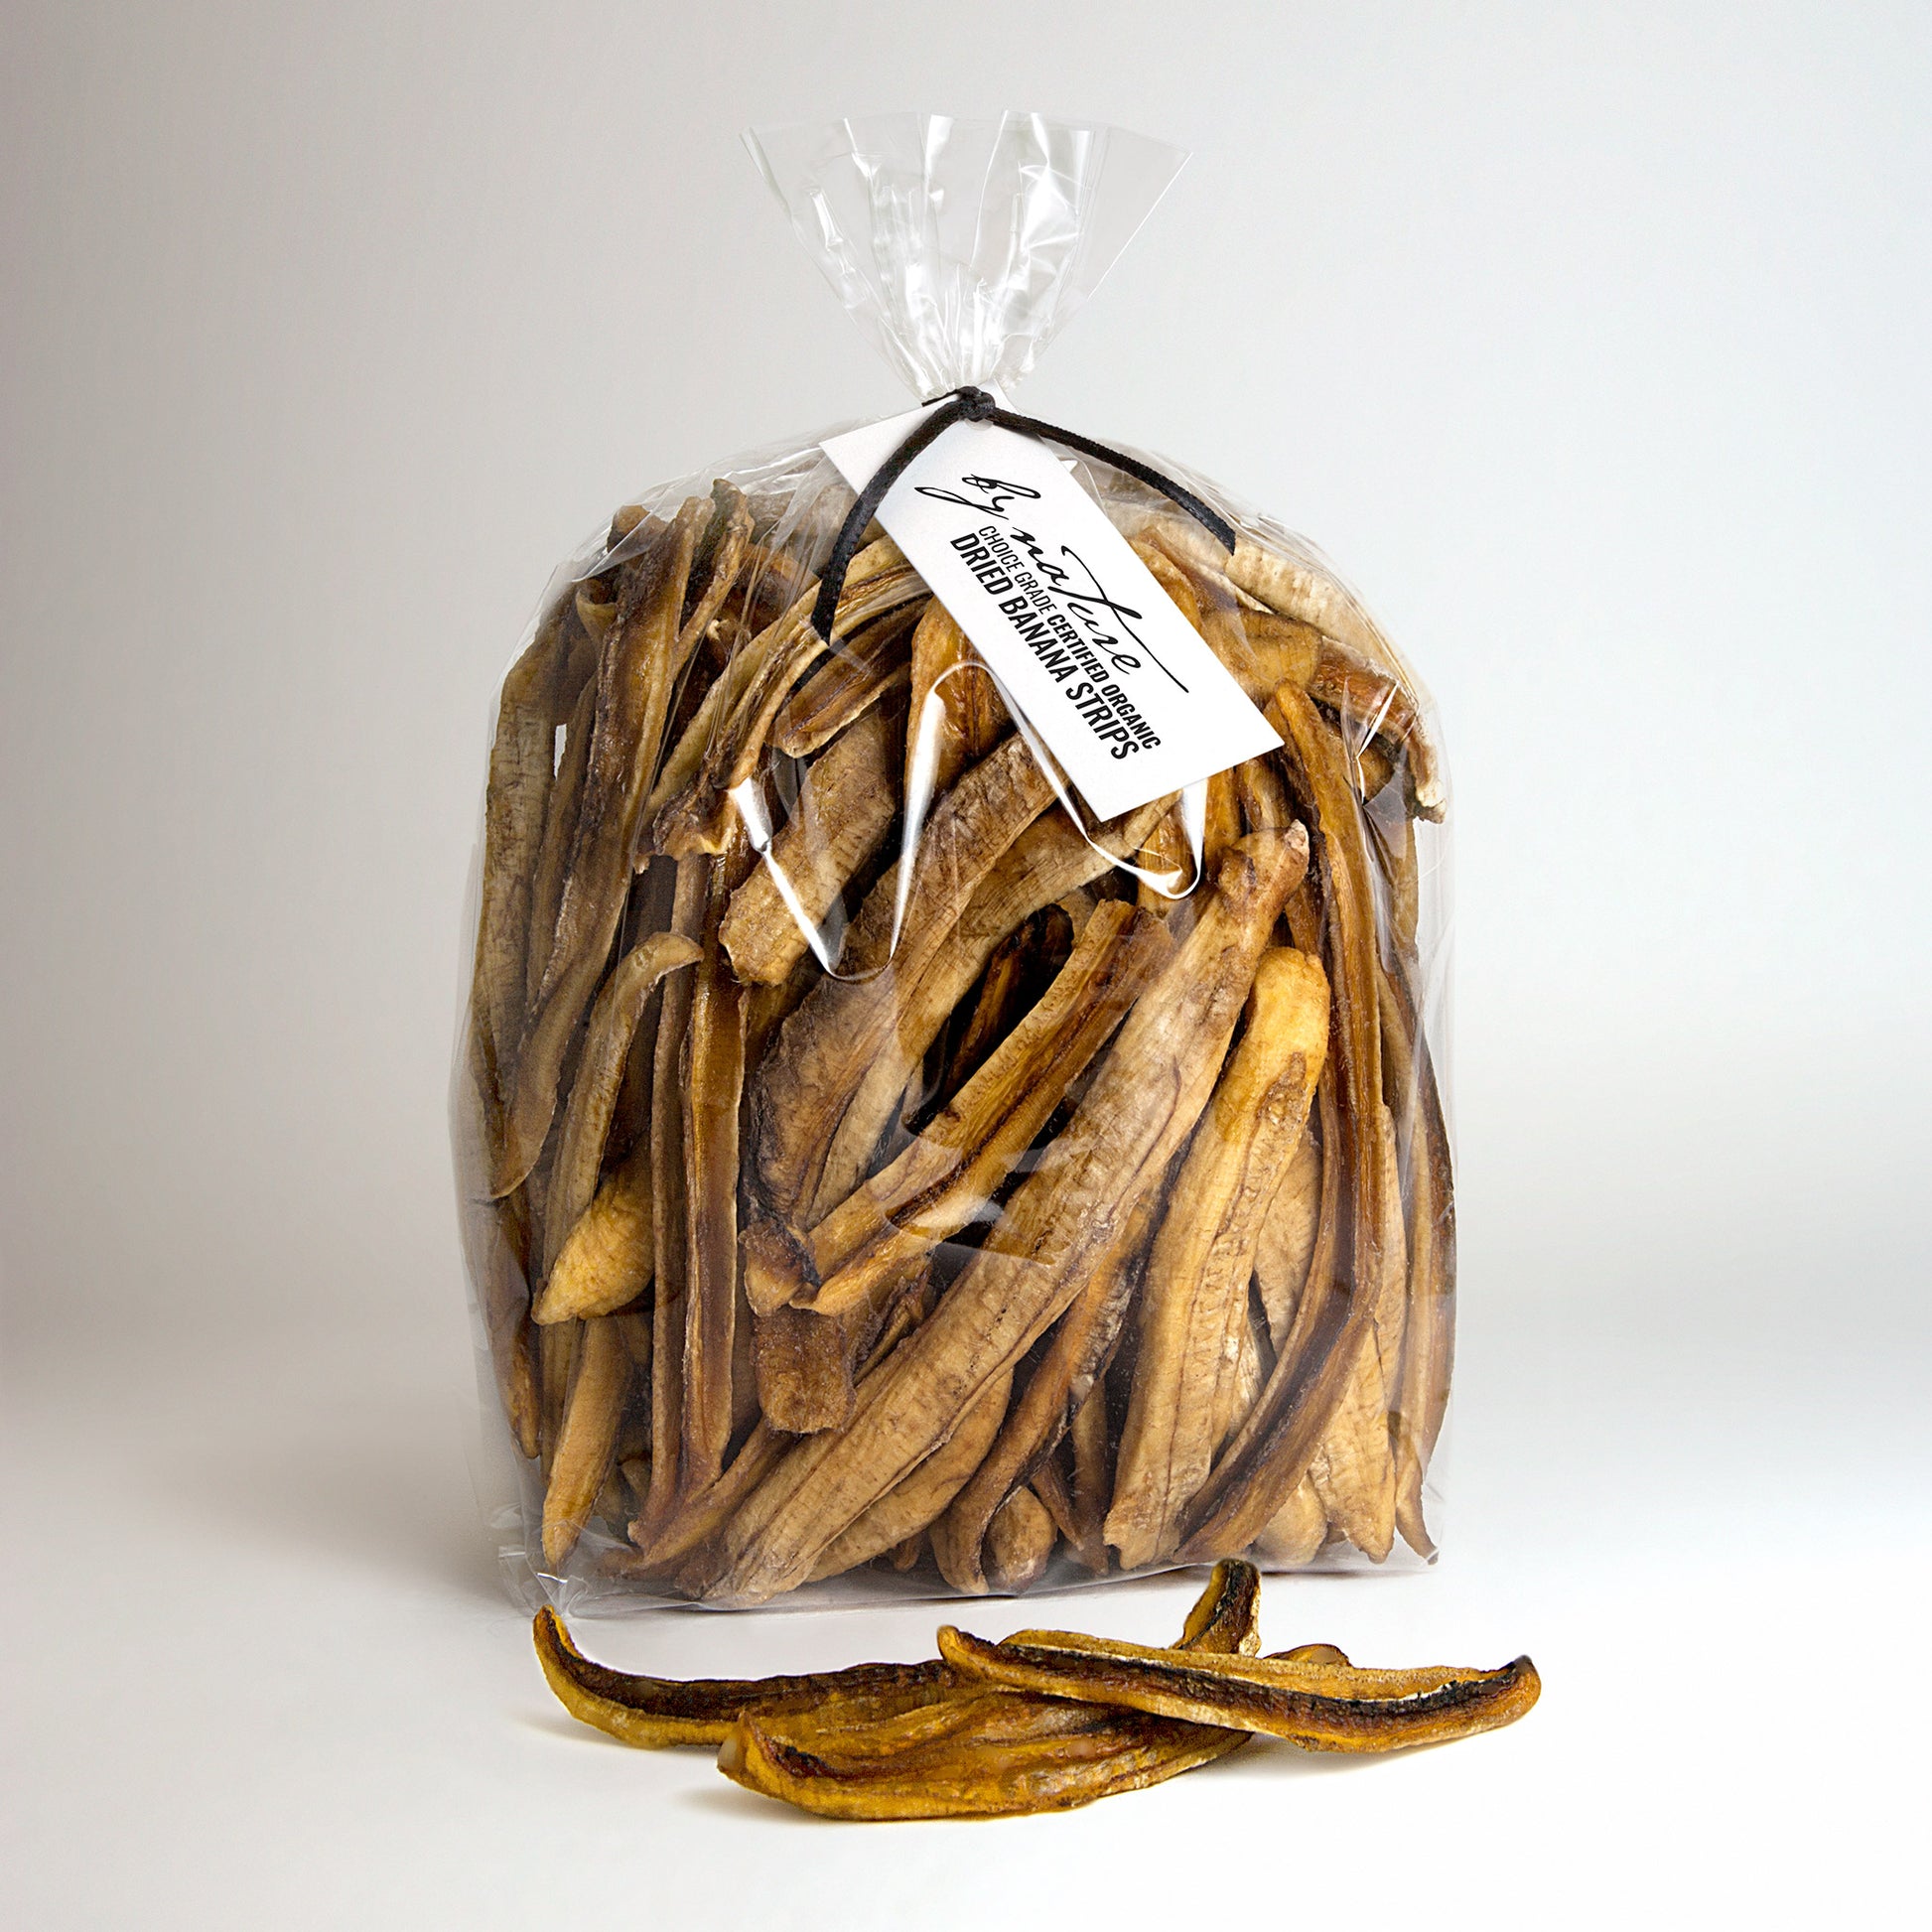 BY NATURE Dried Banana Strips, 500g - certified organic at source, preservative-free.